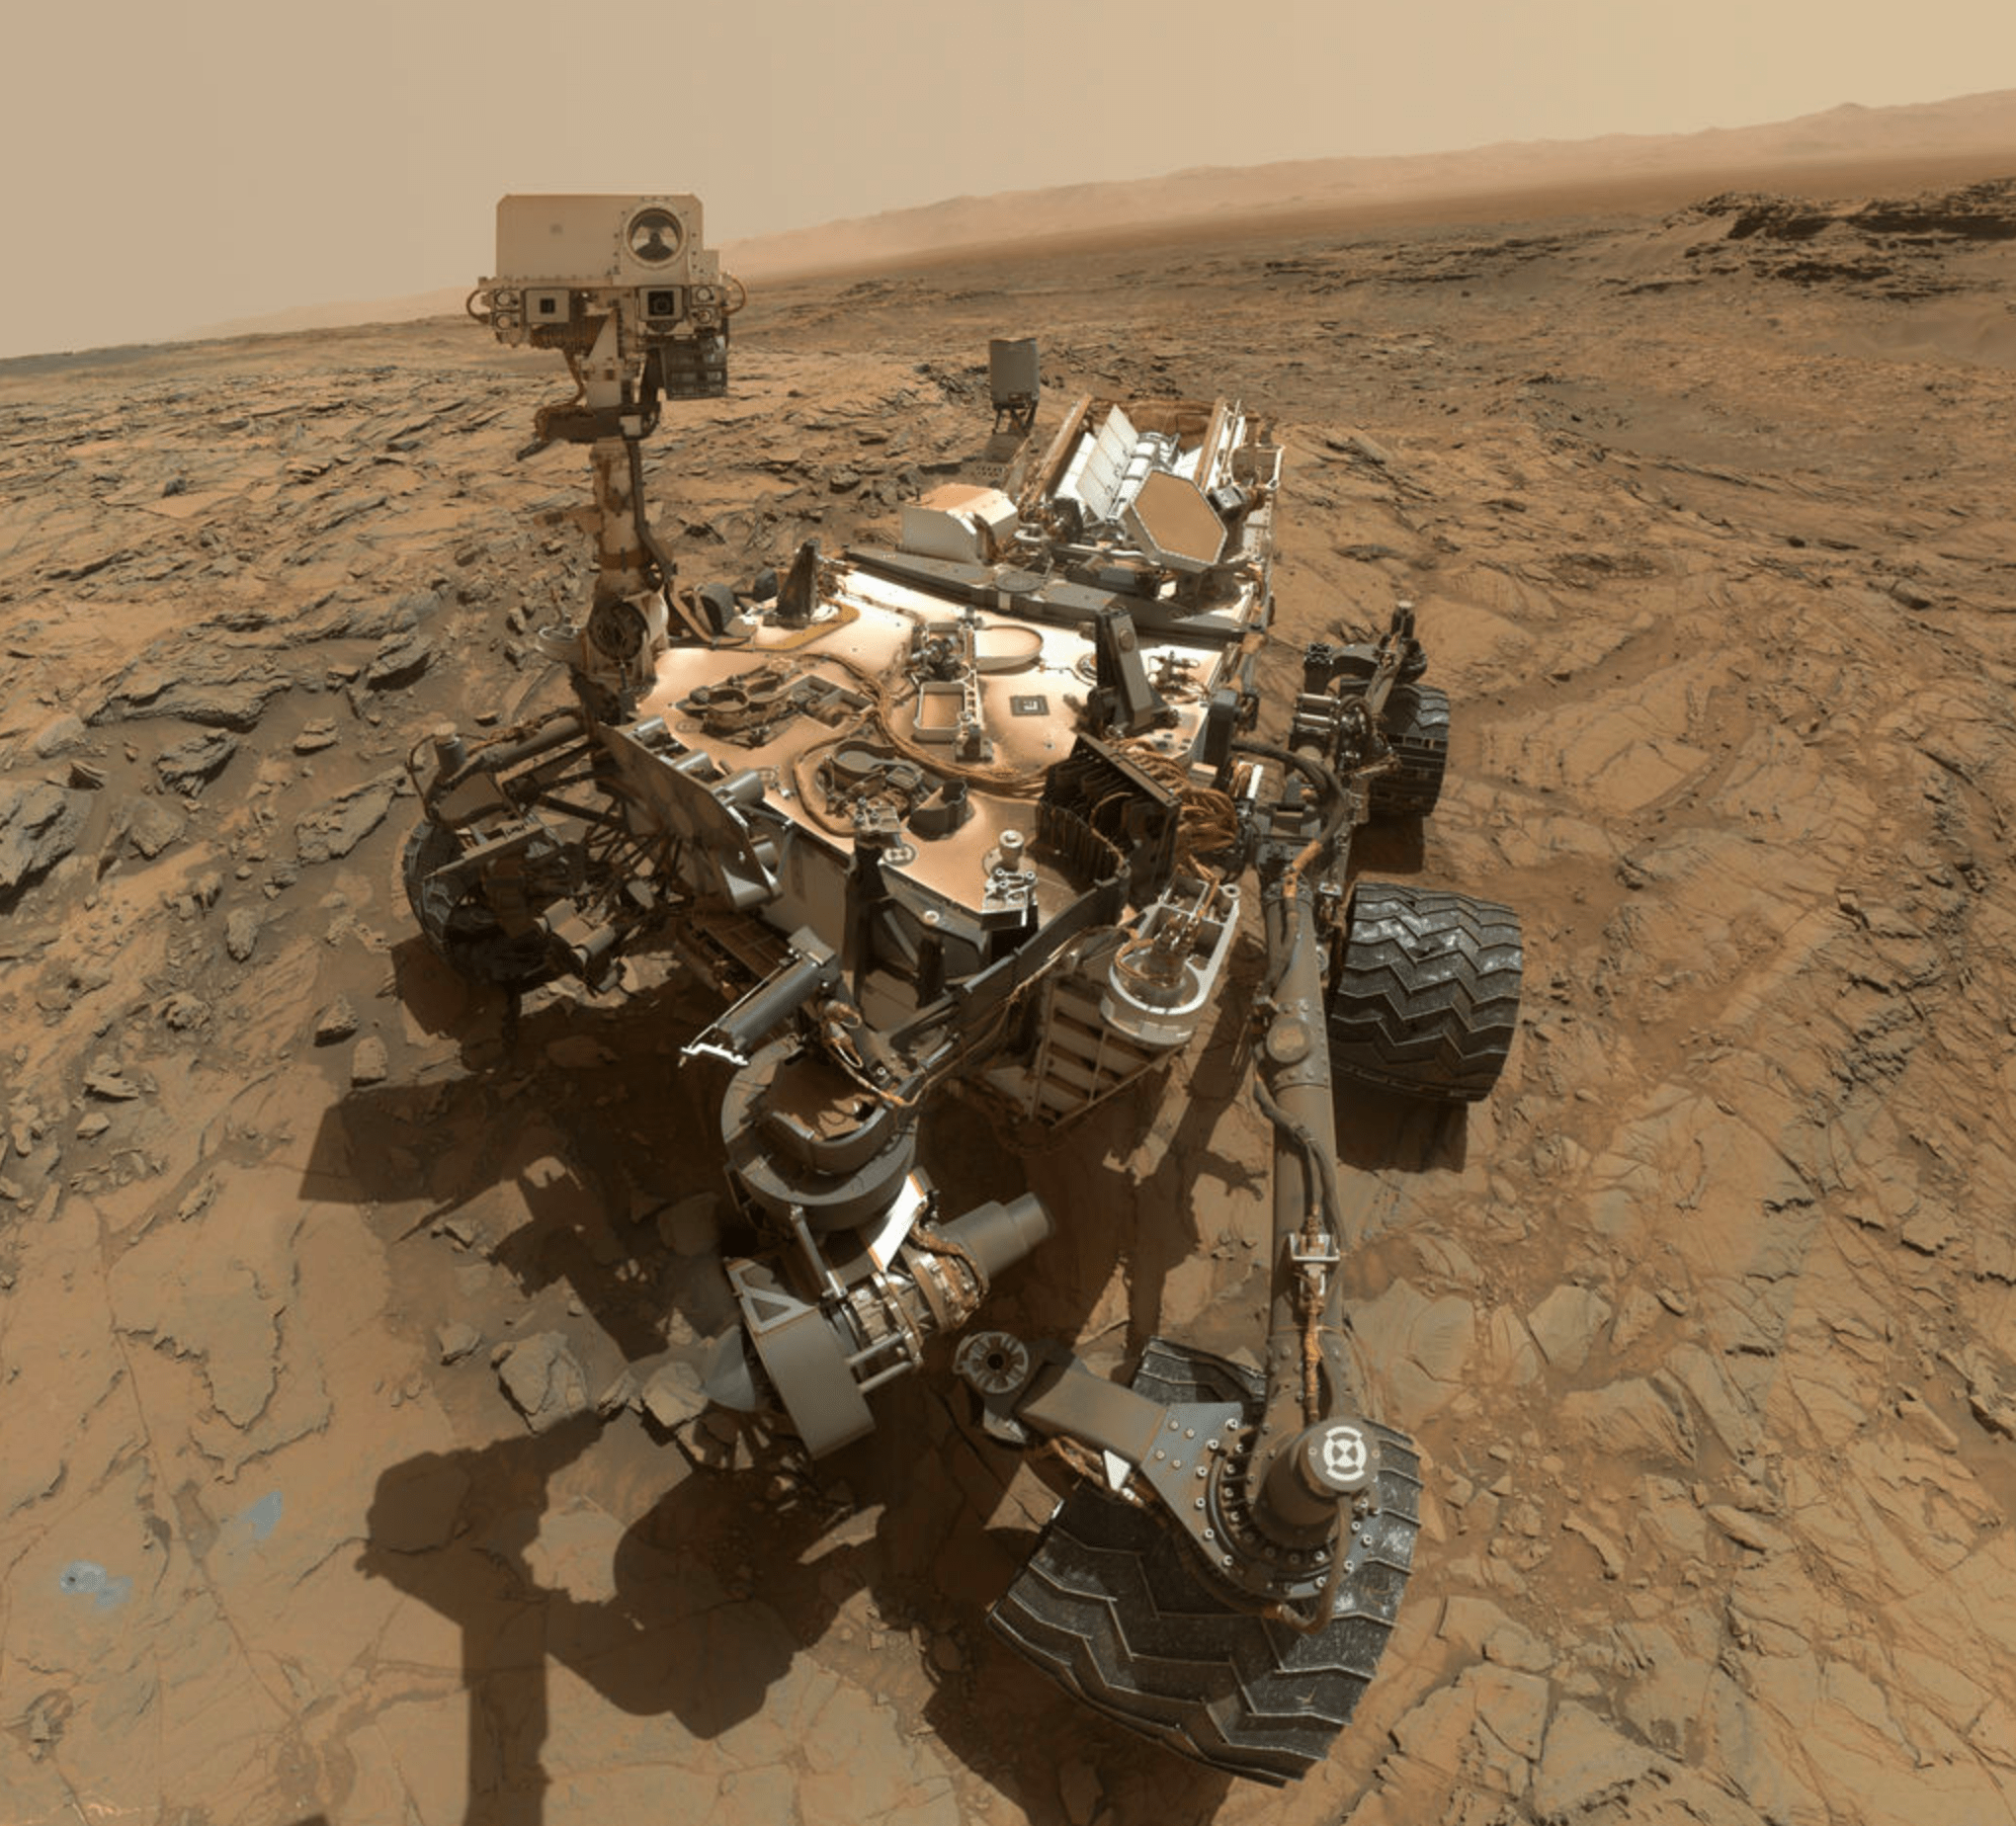 A photograph of the Curiosity rover on the surface of Mars.